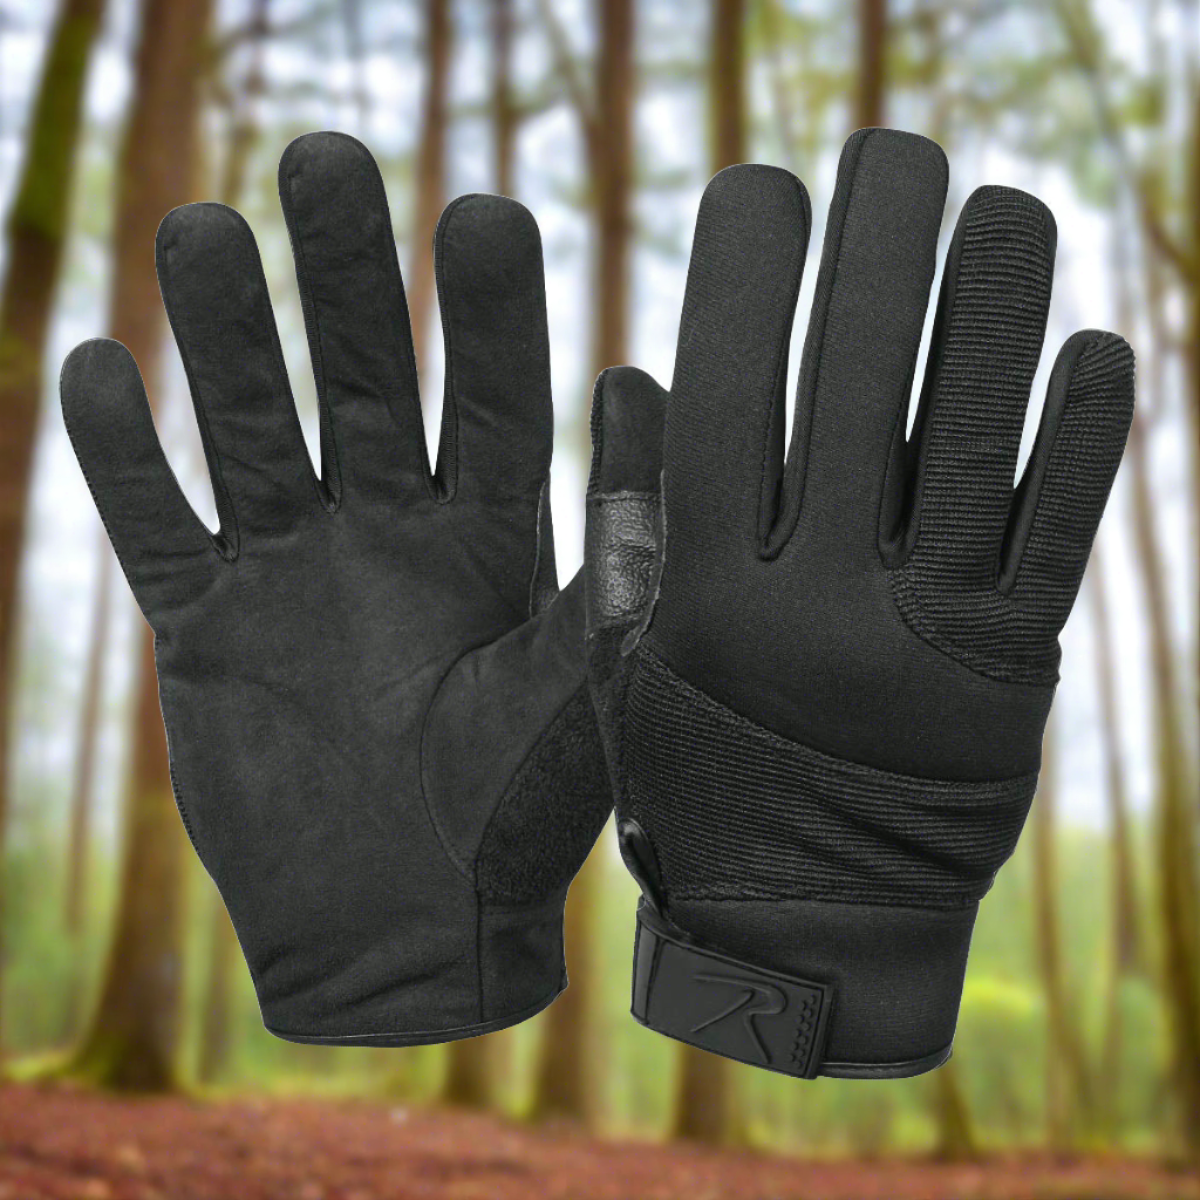 Cut Resistant Gloves - Rothco Street Shield Cut Resistant Police Gloves